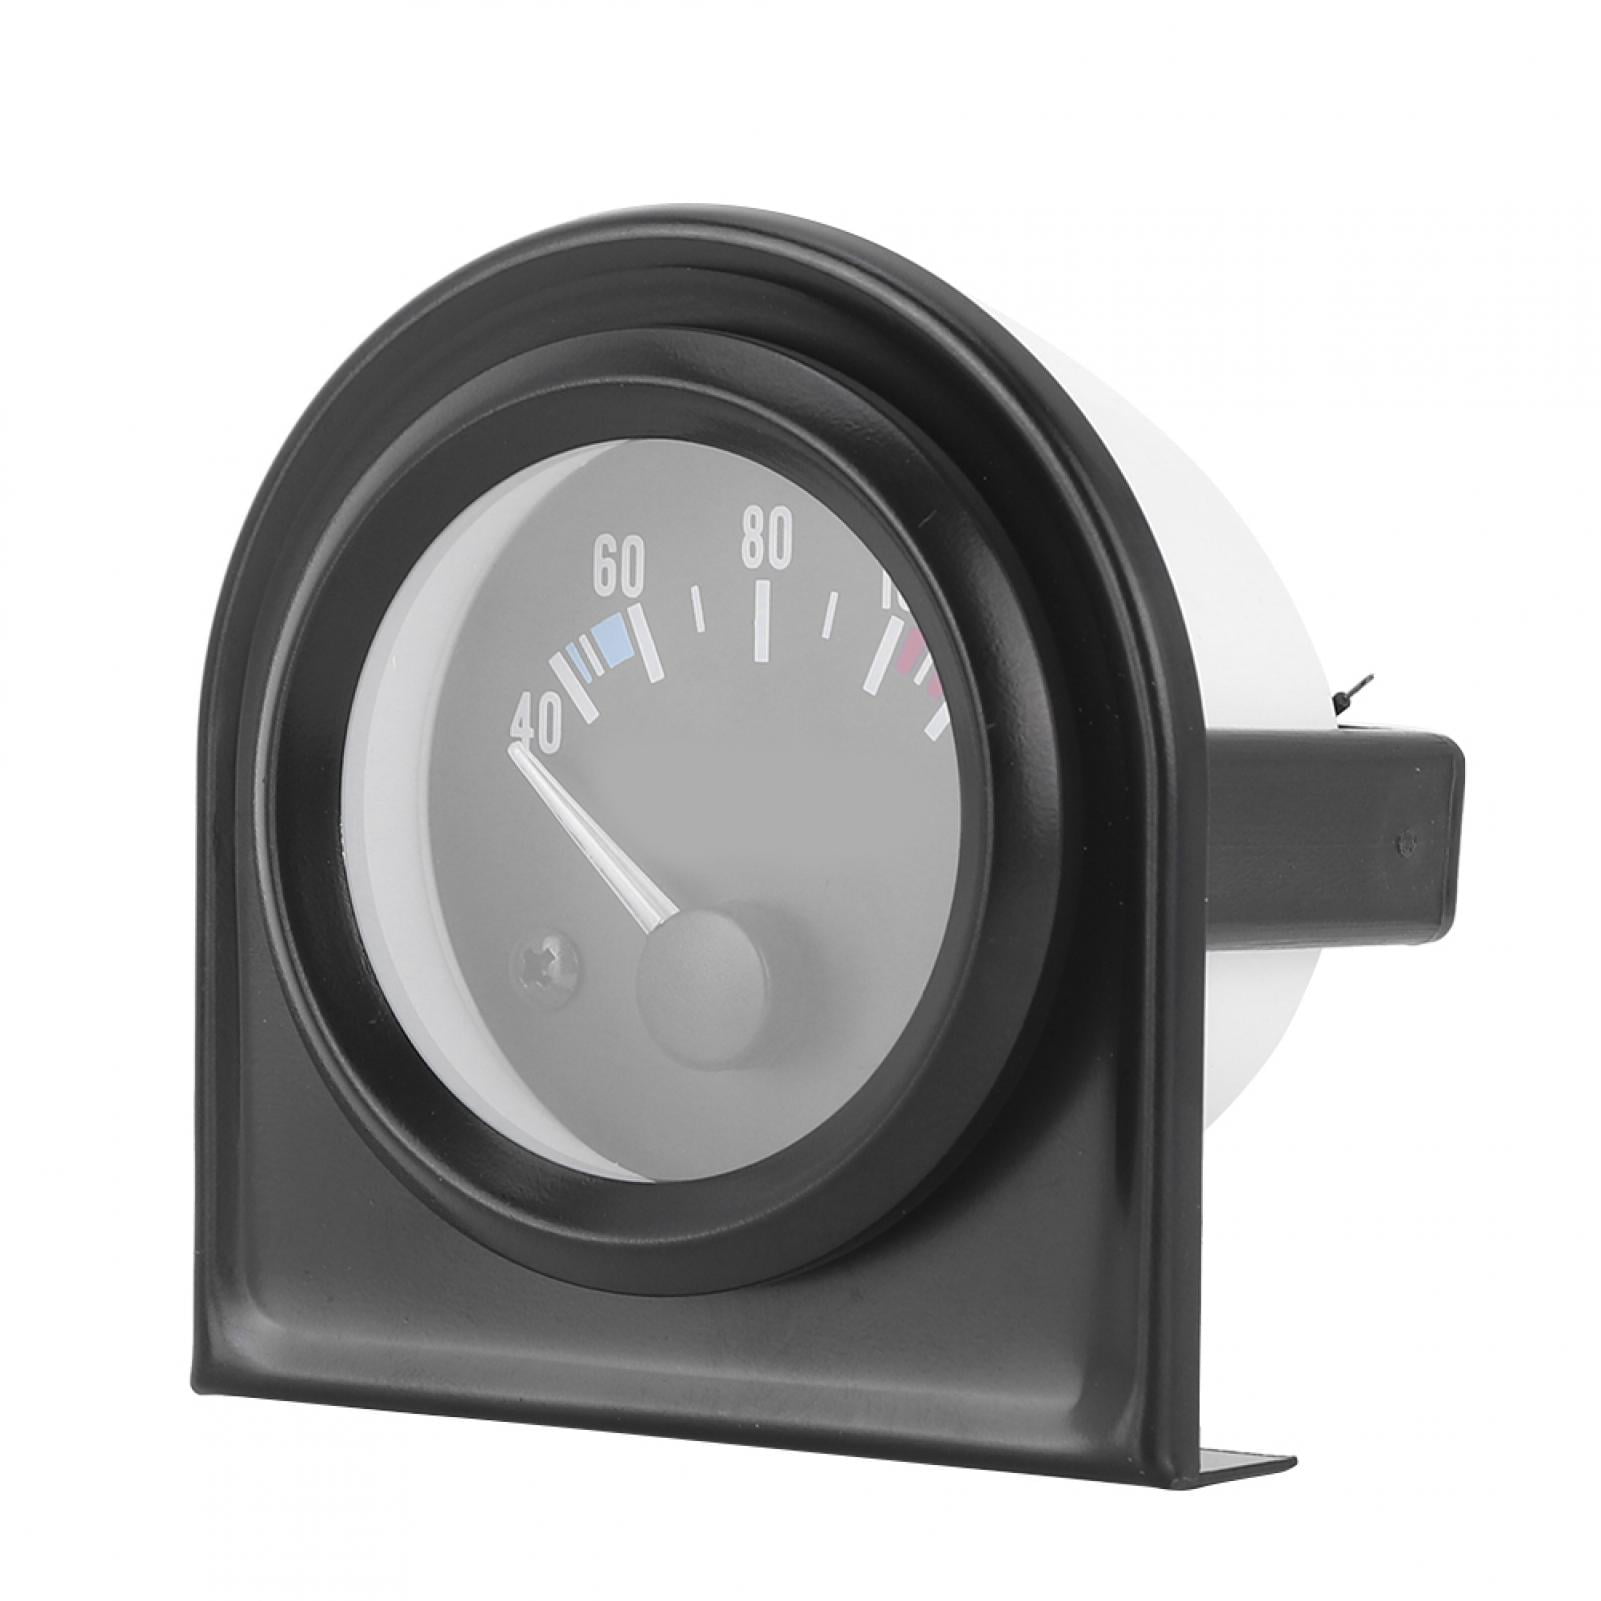 40-120℃ Universal 7 Color LED Water Temp Meter 12V Auto Water Temp Gauge Car Vehicle Modification Accessory Diameter 2in/52mm Car Water Temperature Meter 